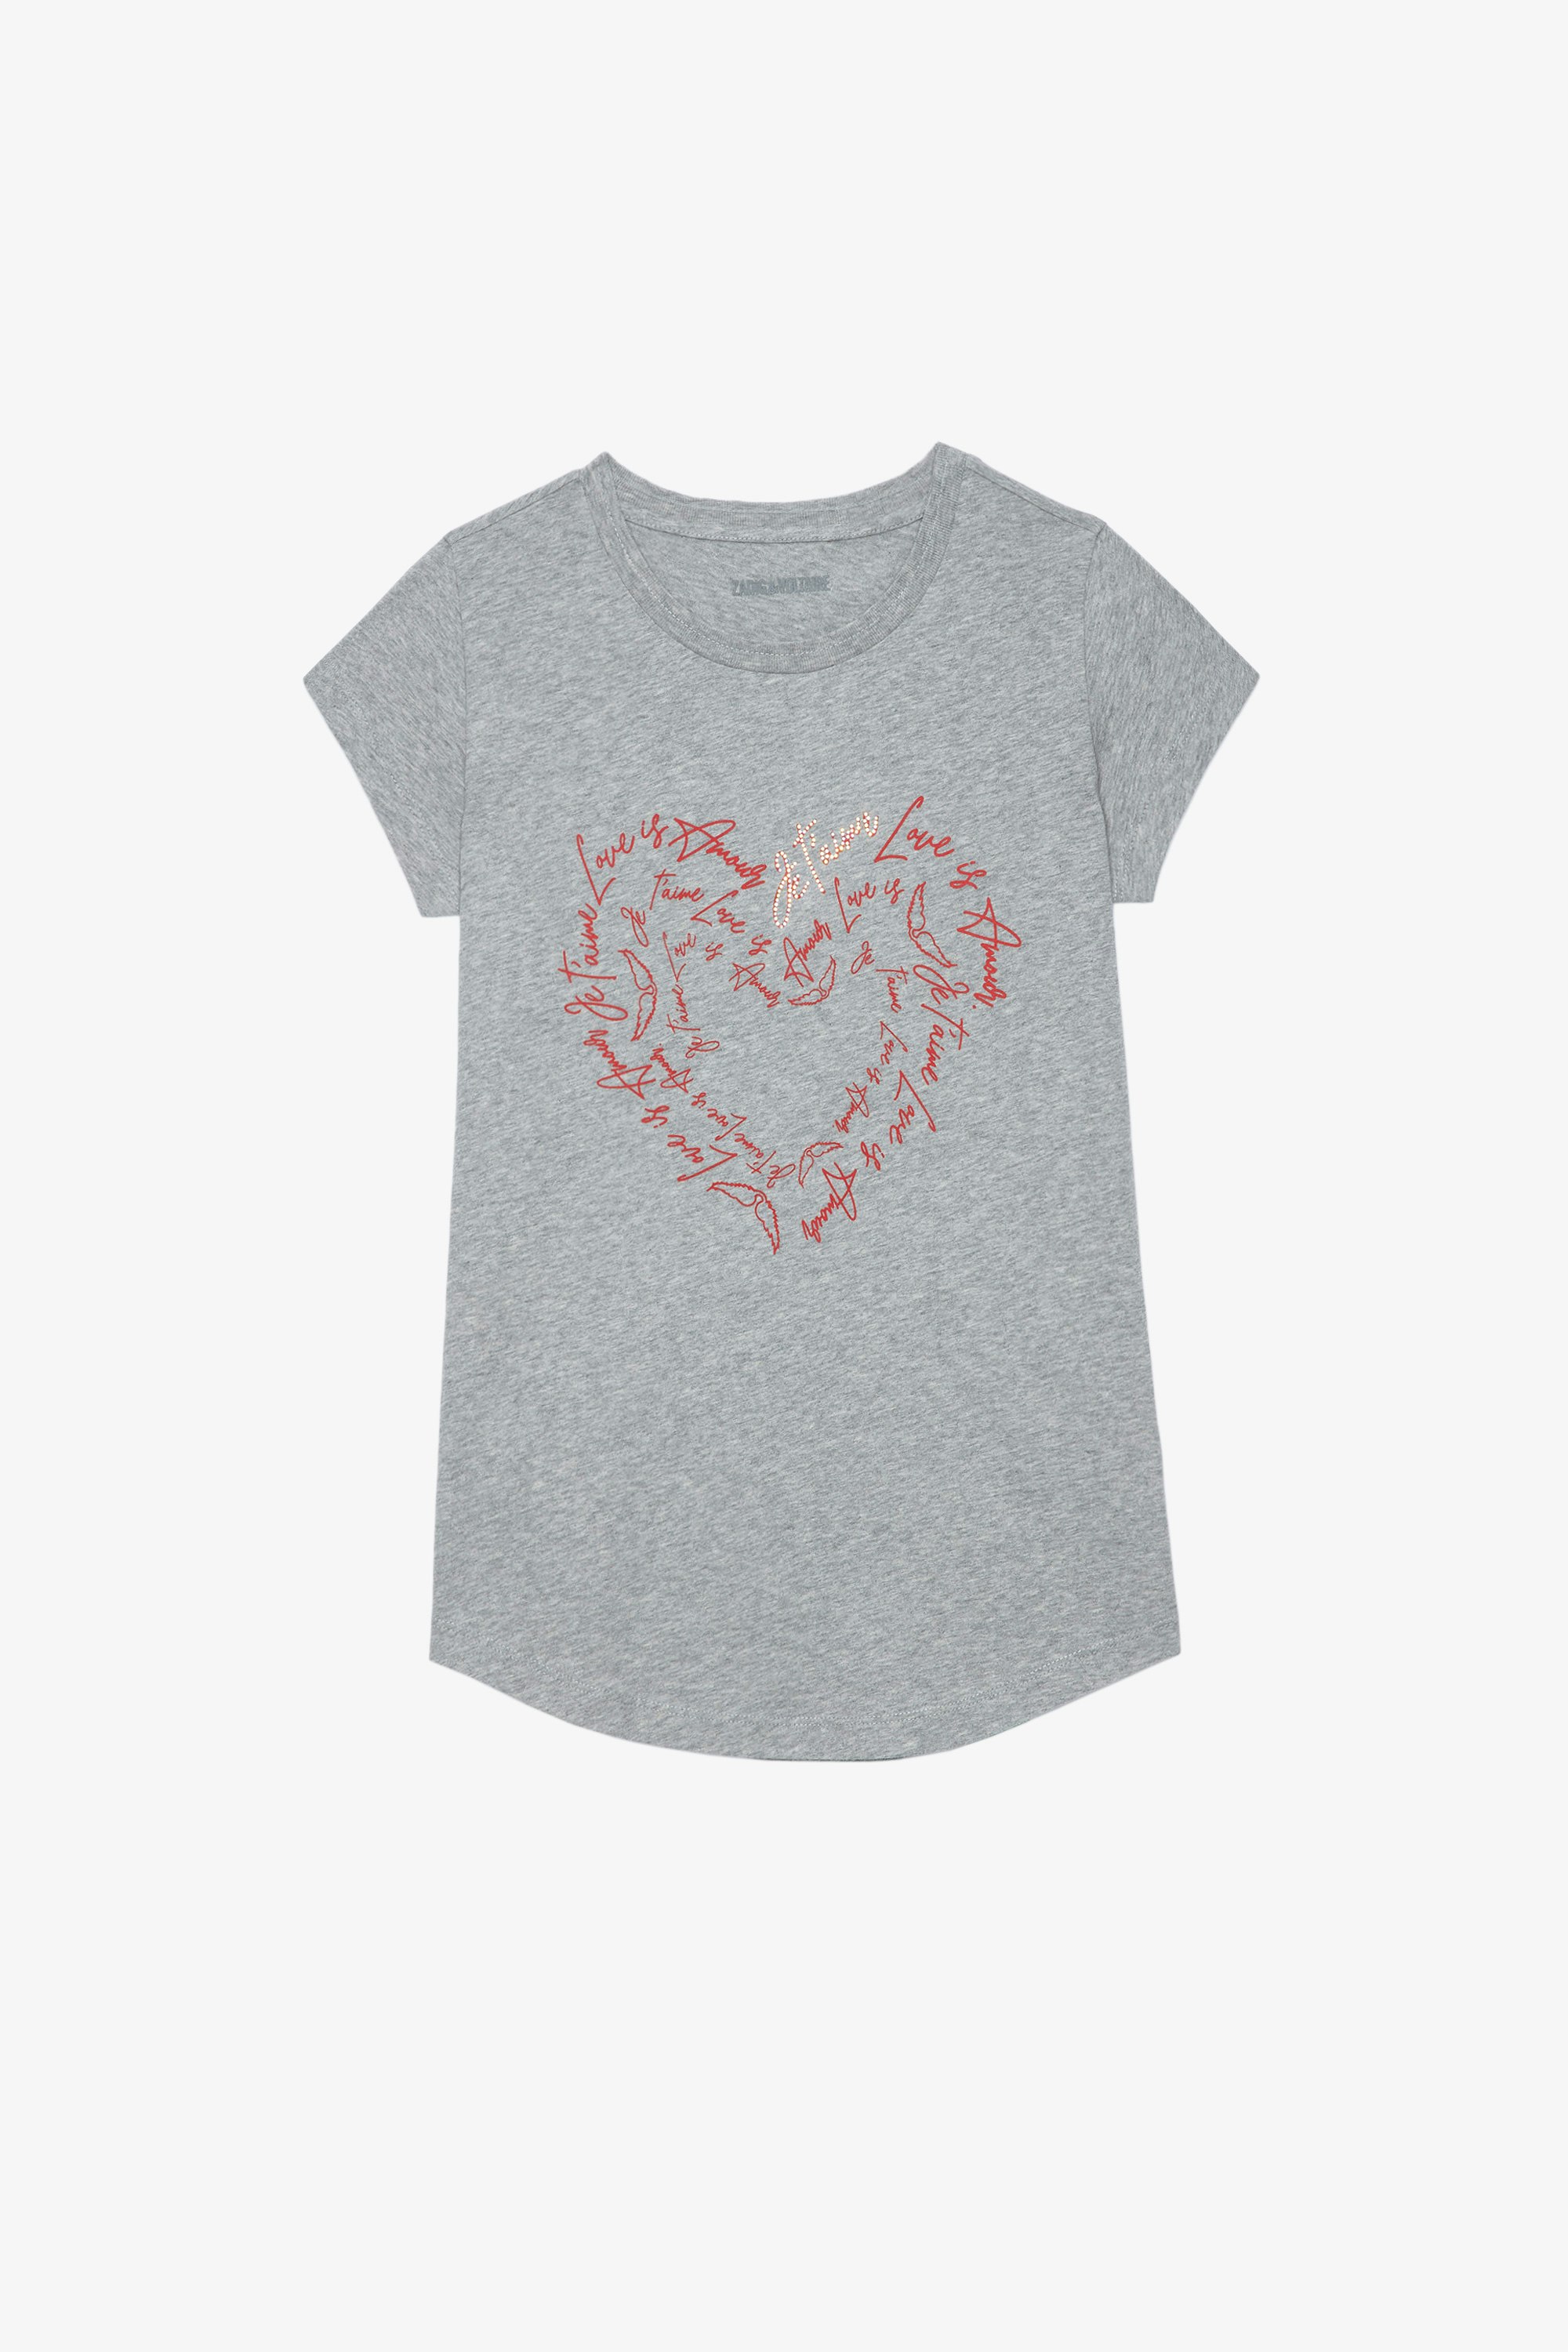 Skinny Heart Ｔシャツ Women’s grey marl cotton T-shirt with heart print and crystals